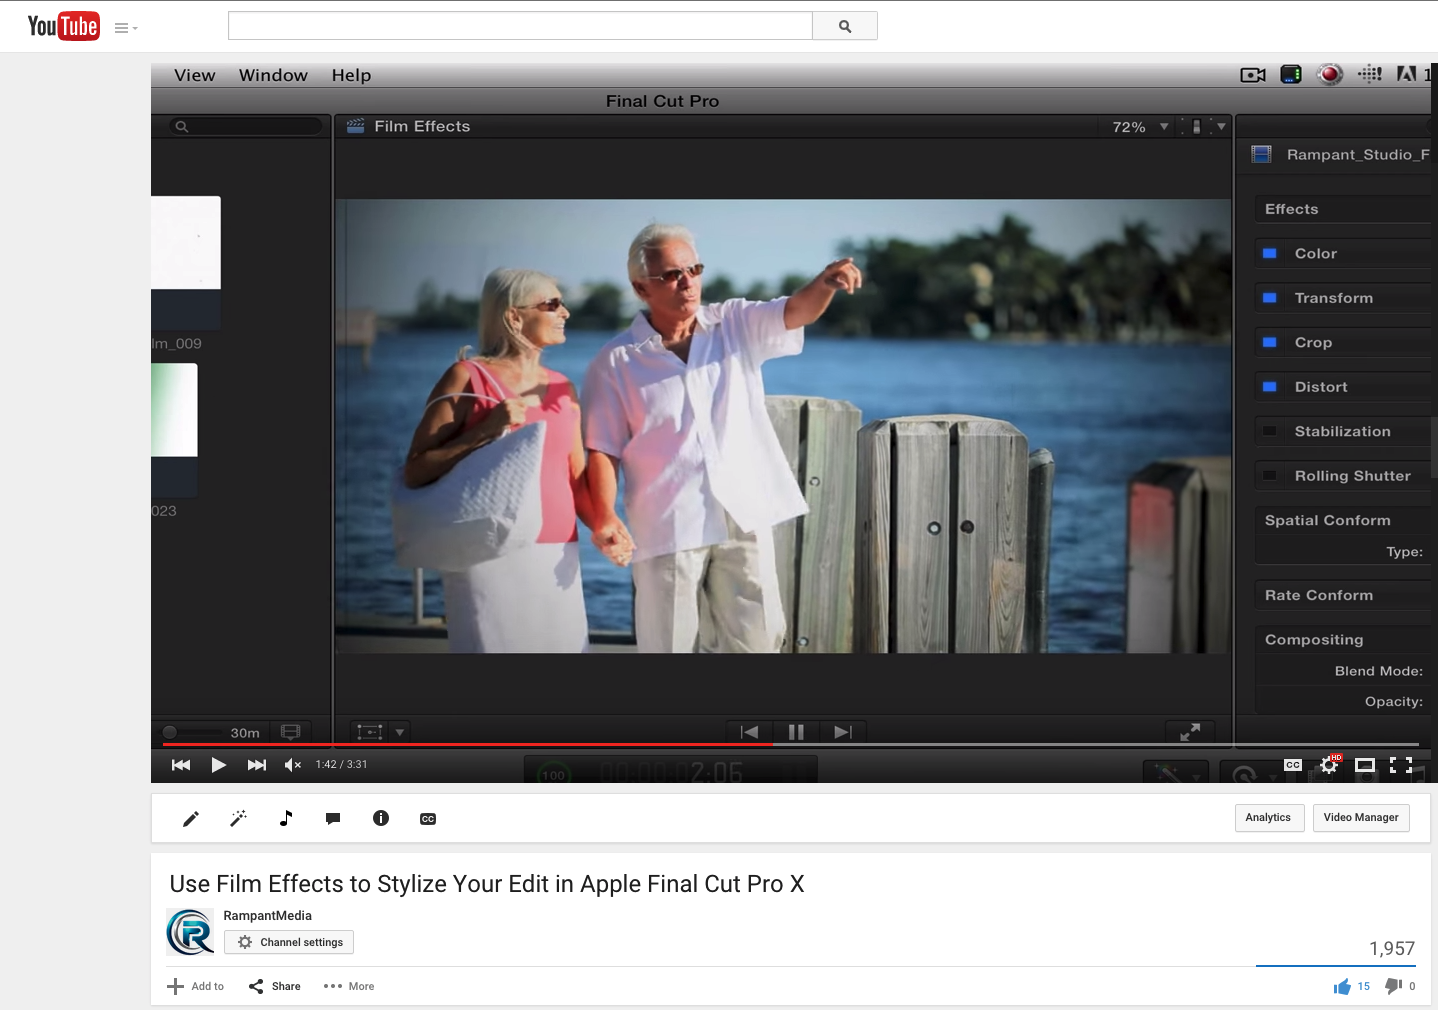 Use Film Effects to Stylize Your Edit in Apple Final Cut Pro X